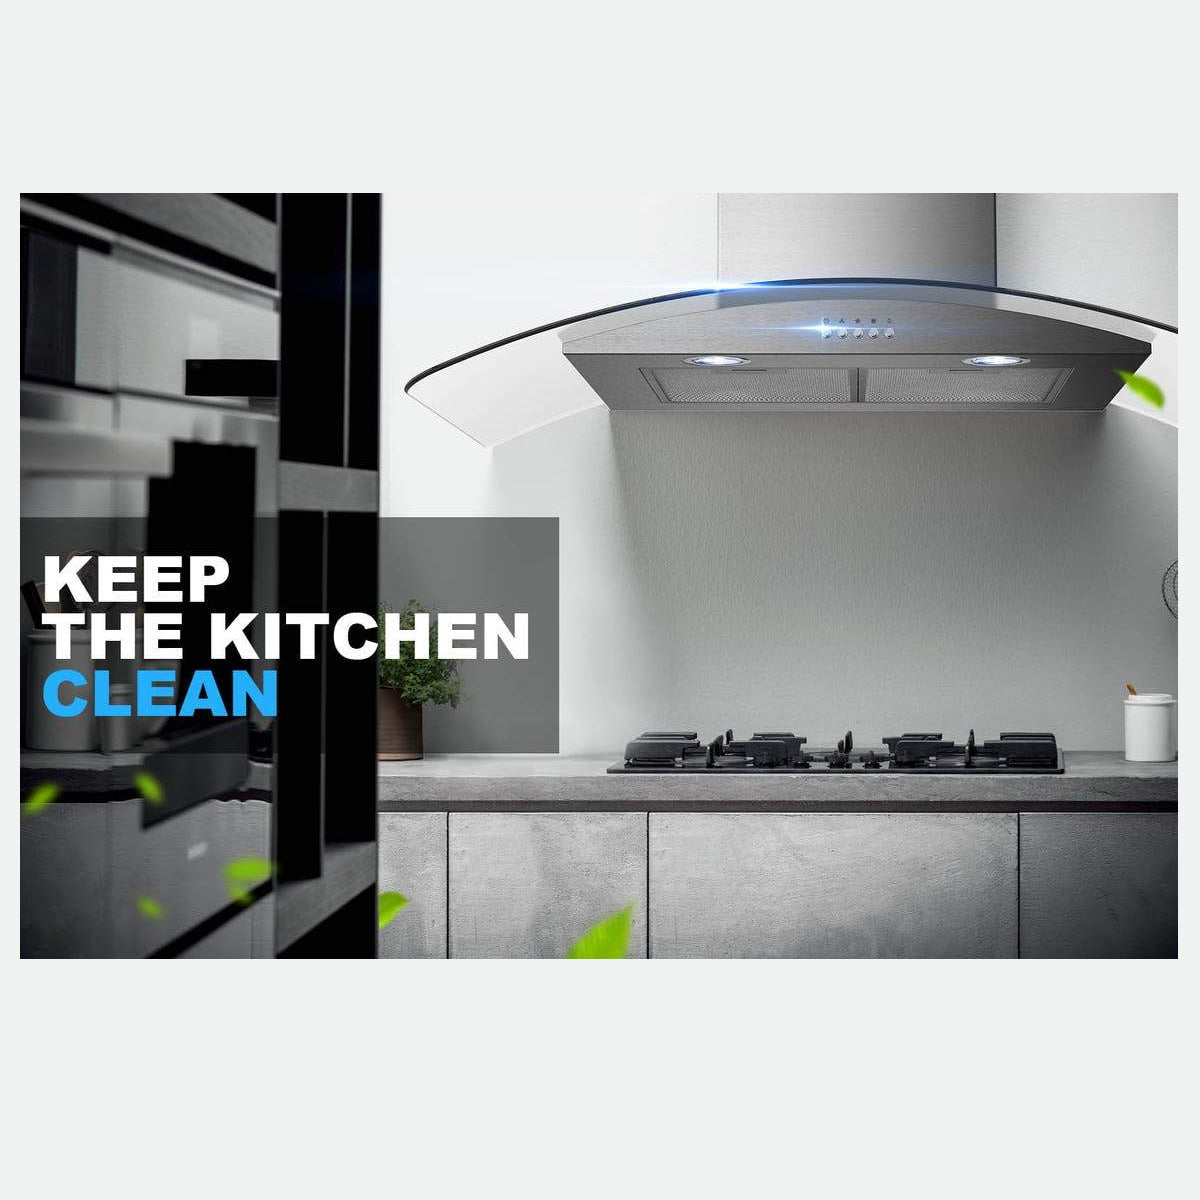 Midea 90cm Canopy Rangehood Curved Glass and Stainless Steel